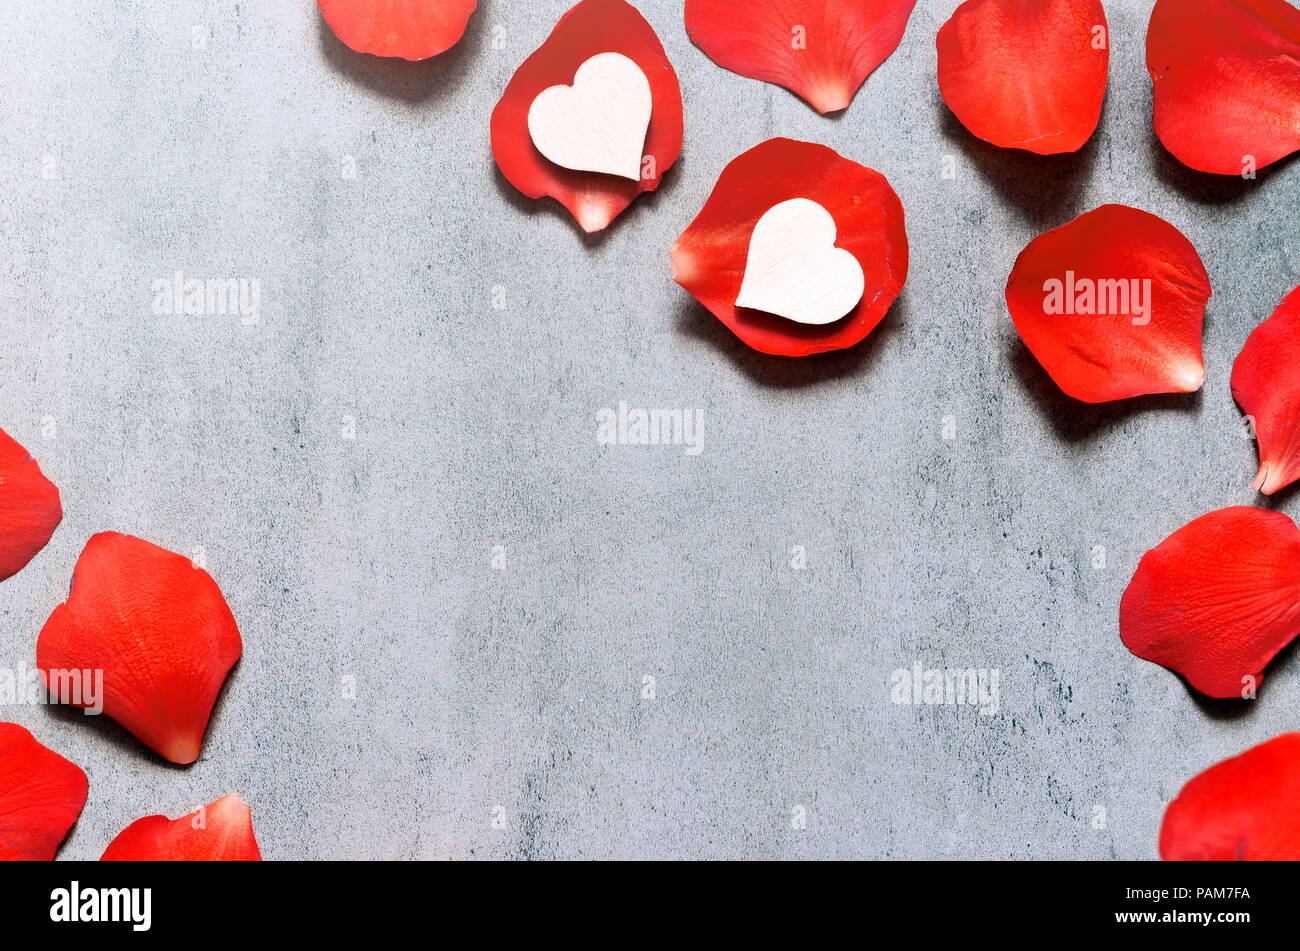 White heart decoration on red rose petals background on grey table. Romance concept. Flat lay, top view. Stock Photo